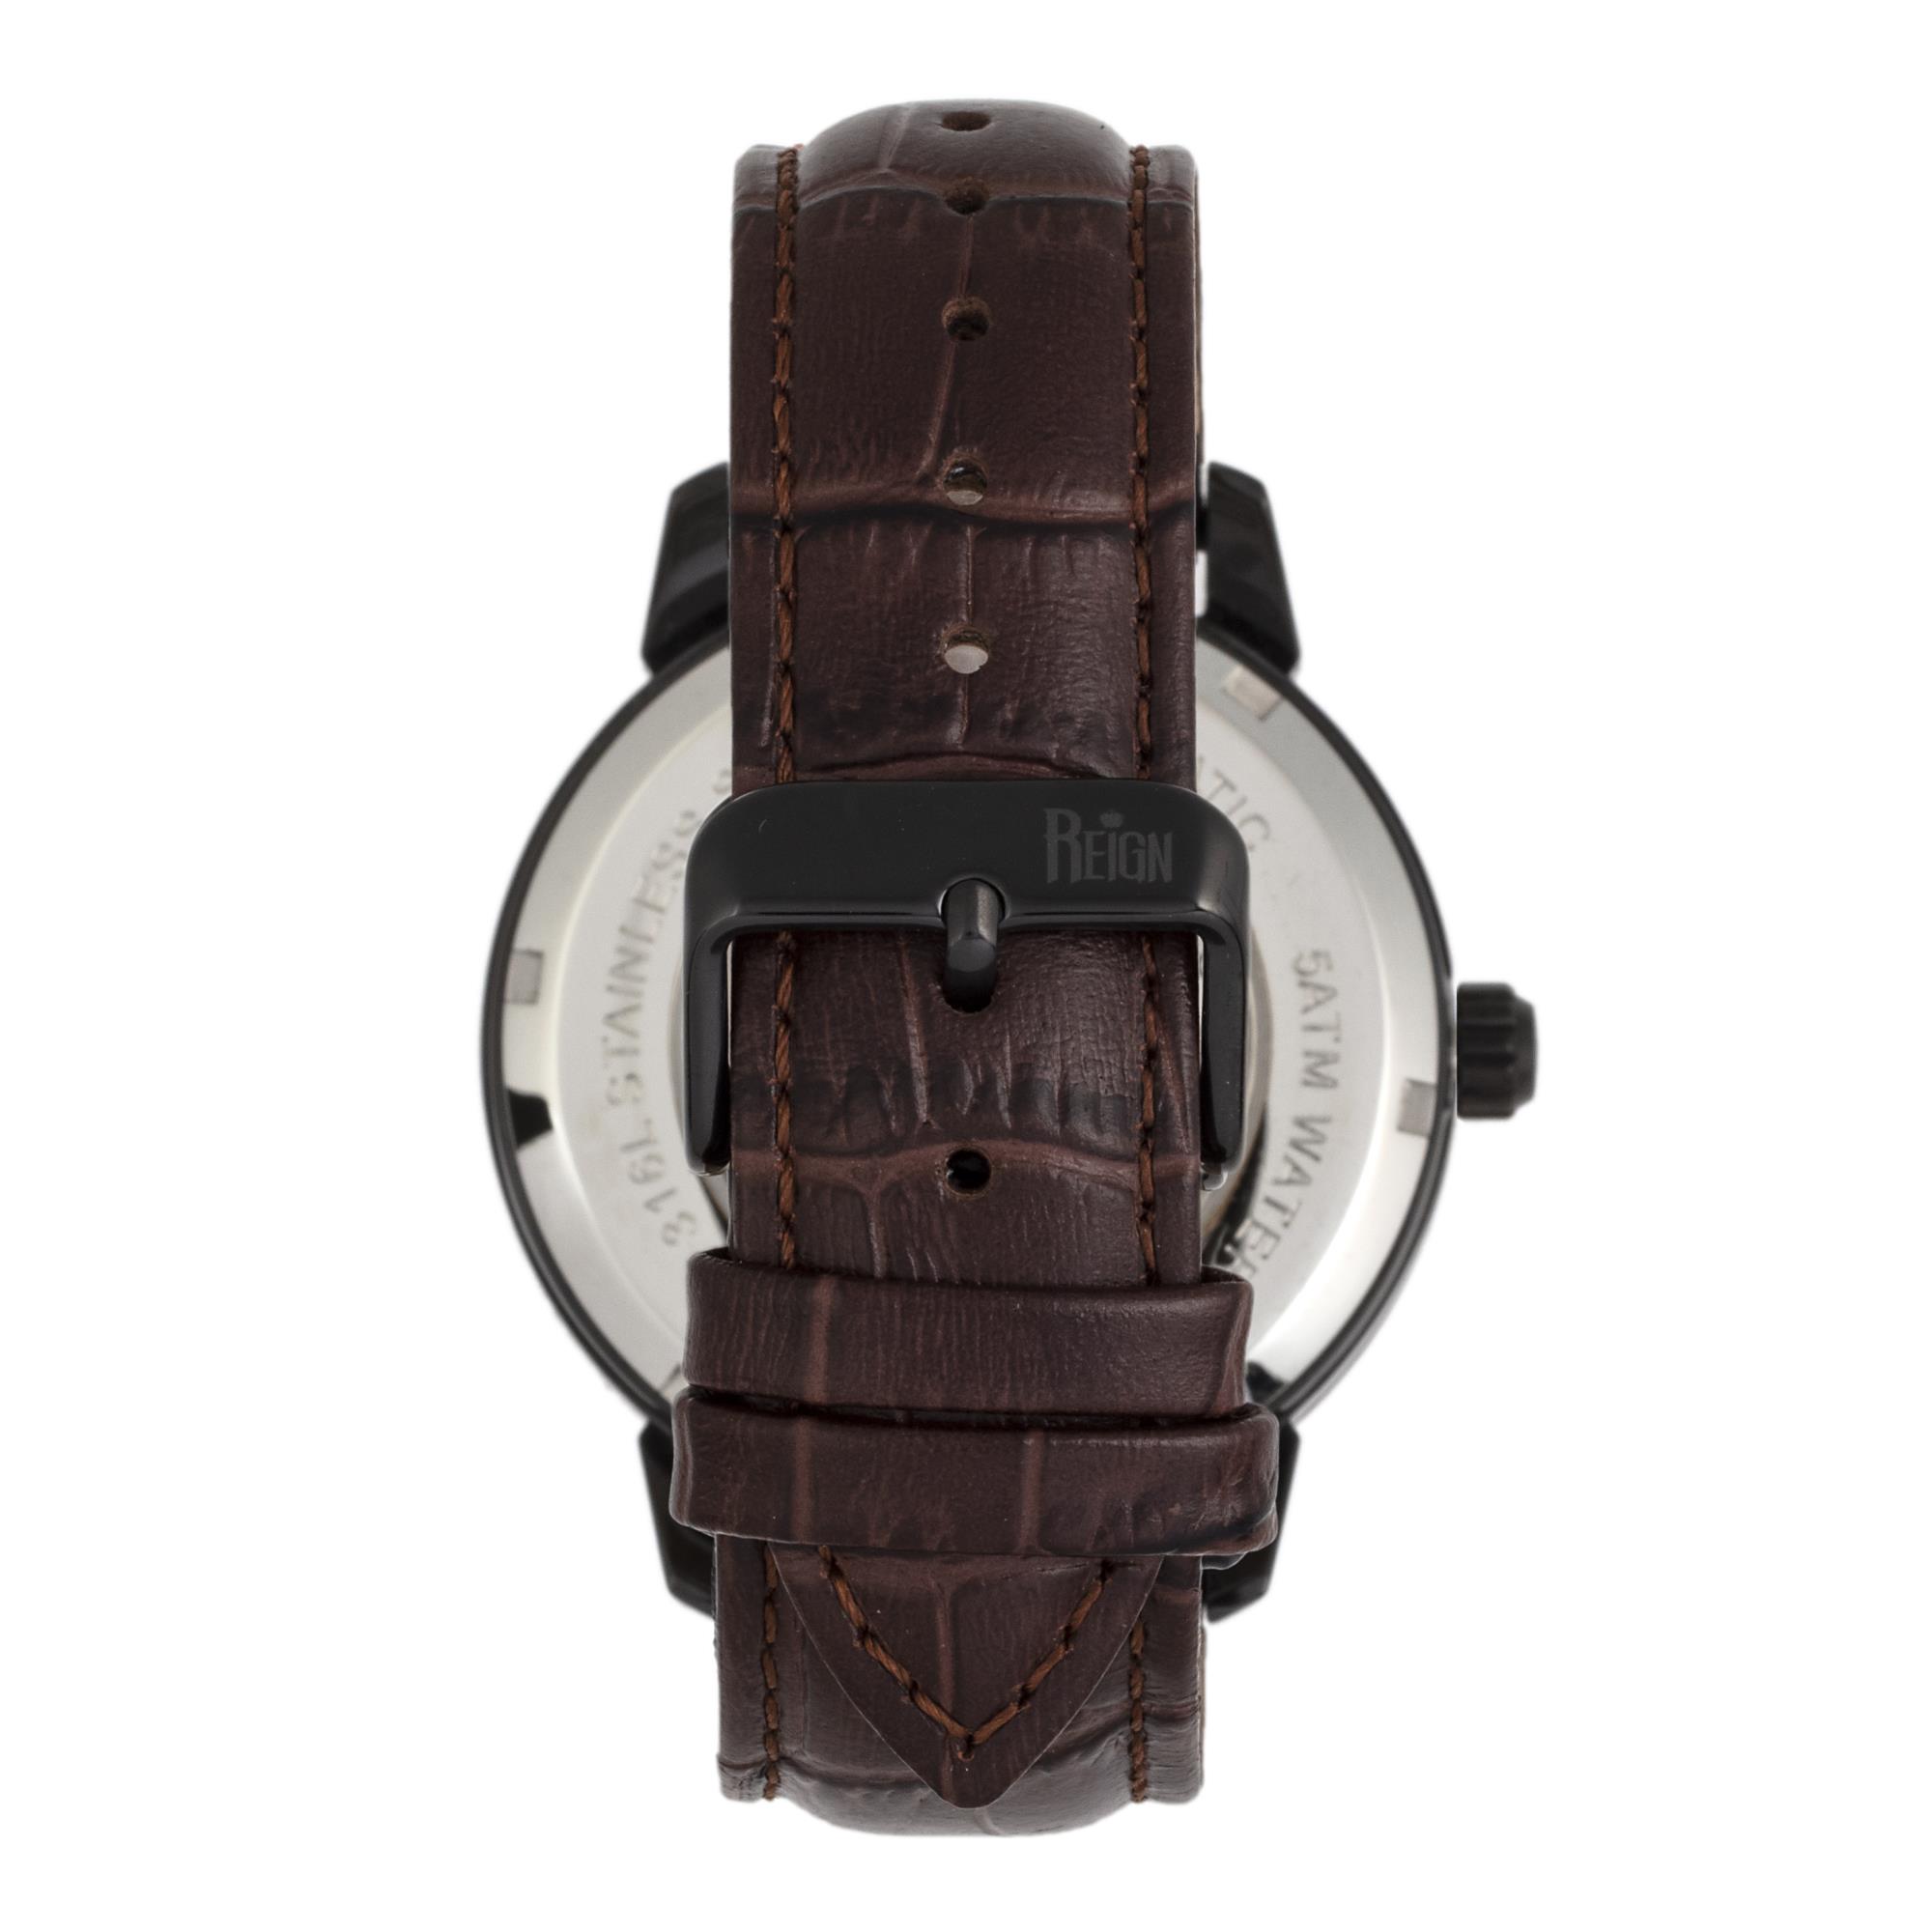 Reign Rudolf Automatic Skeleton Leather-band Watch - Navy Brown/Black